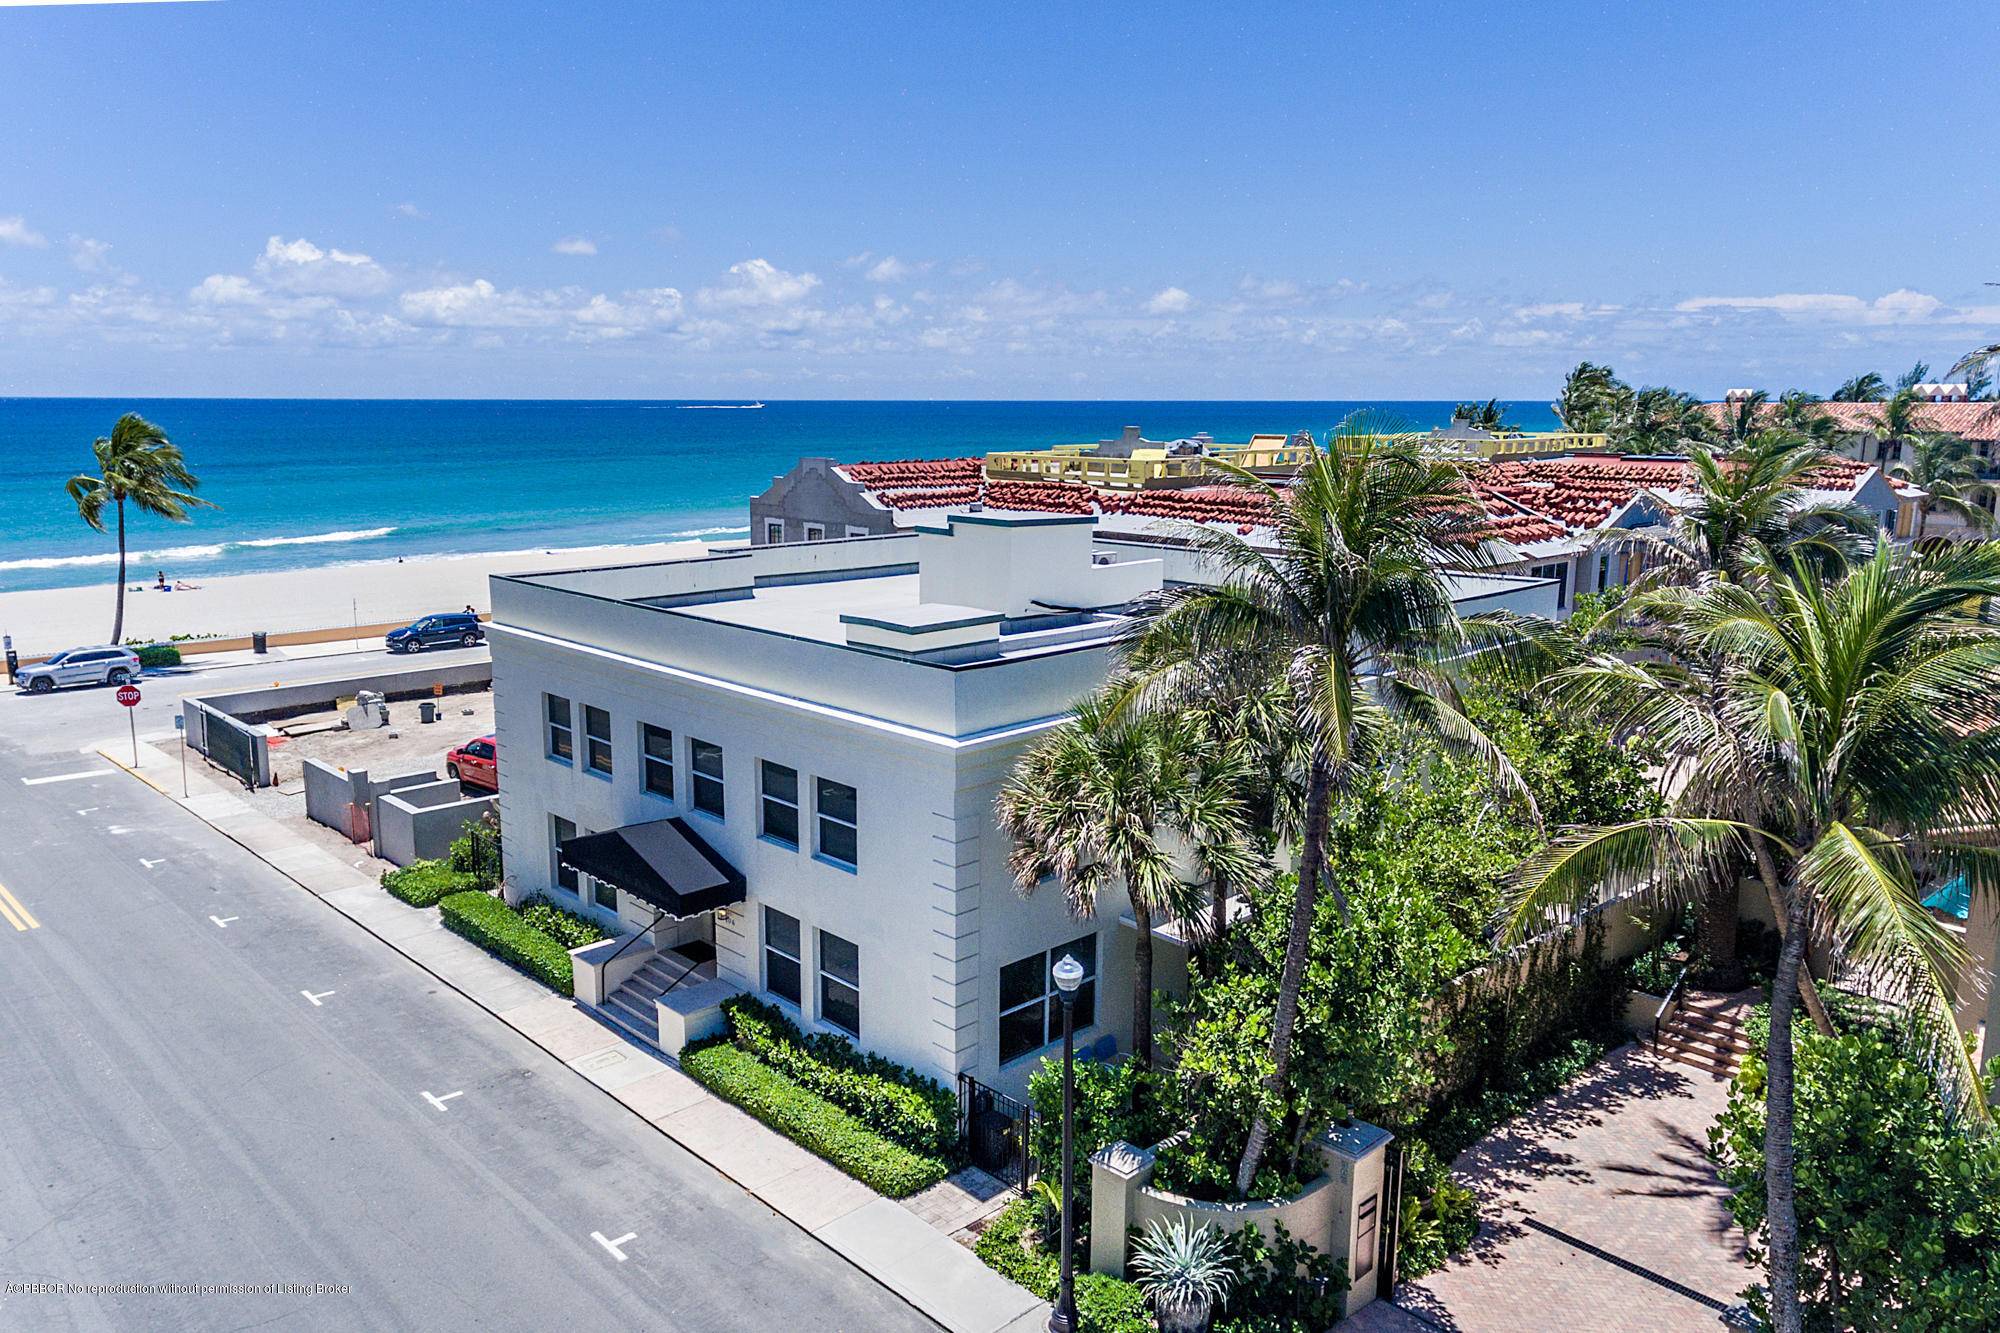 Situated one block south of the prestigious Worth Avenue shopping district and only one property west and stone's throw to the Atlantic Ocean with mostly unobstructed views of its gorgeous ...